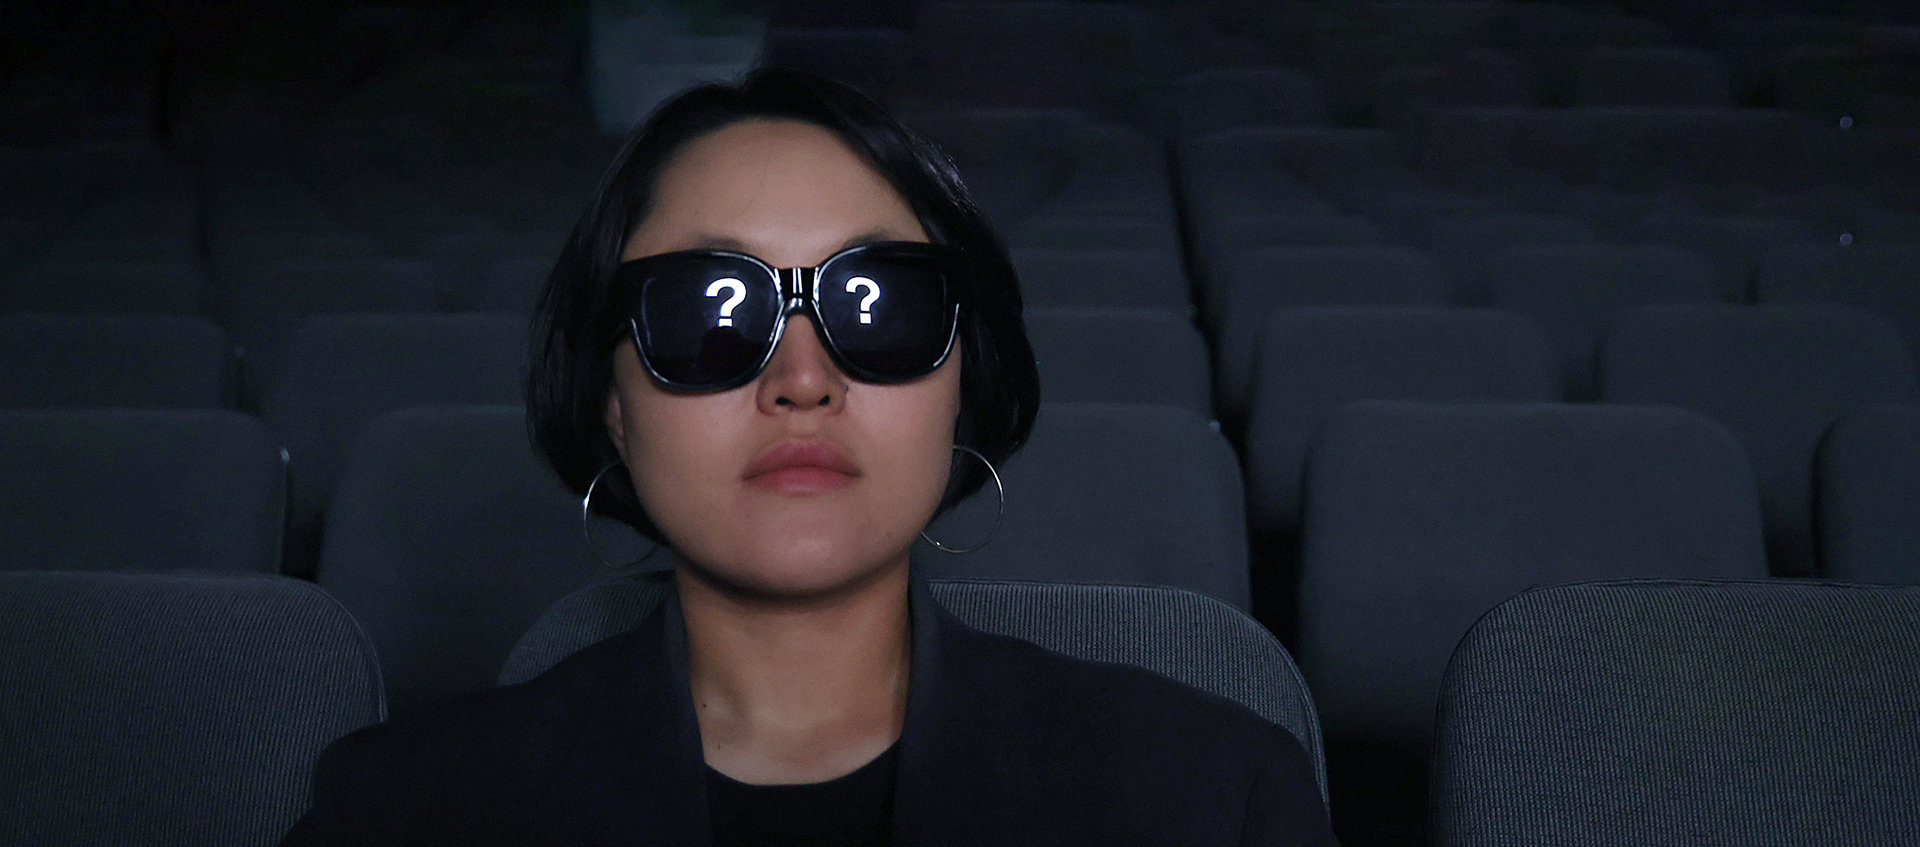 A woman with short black hair sits in a dark theater with dark glasses on, there are question marks in reflecting in the lenses of the glasses.